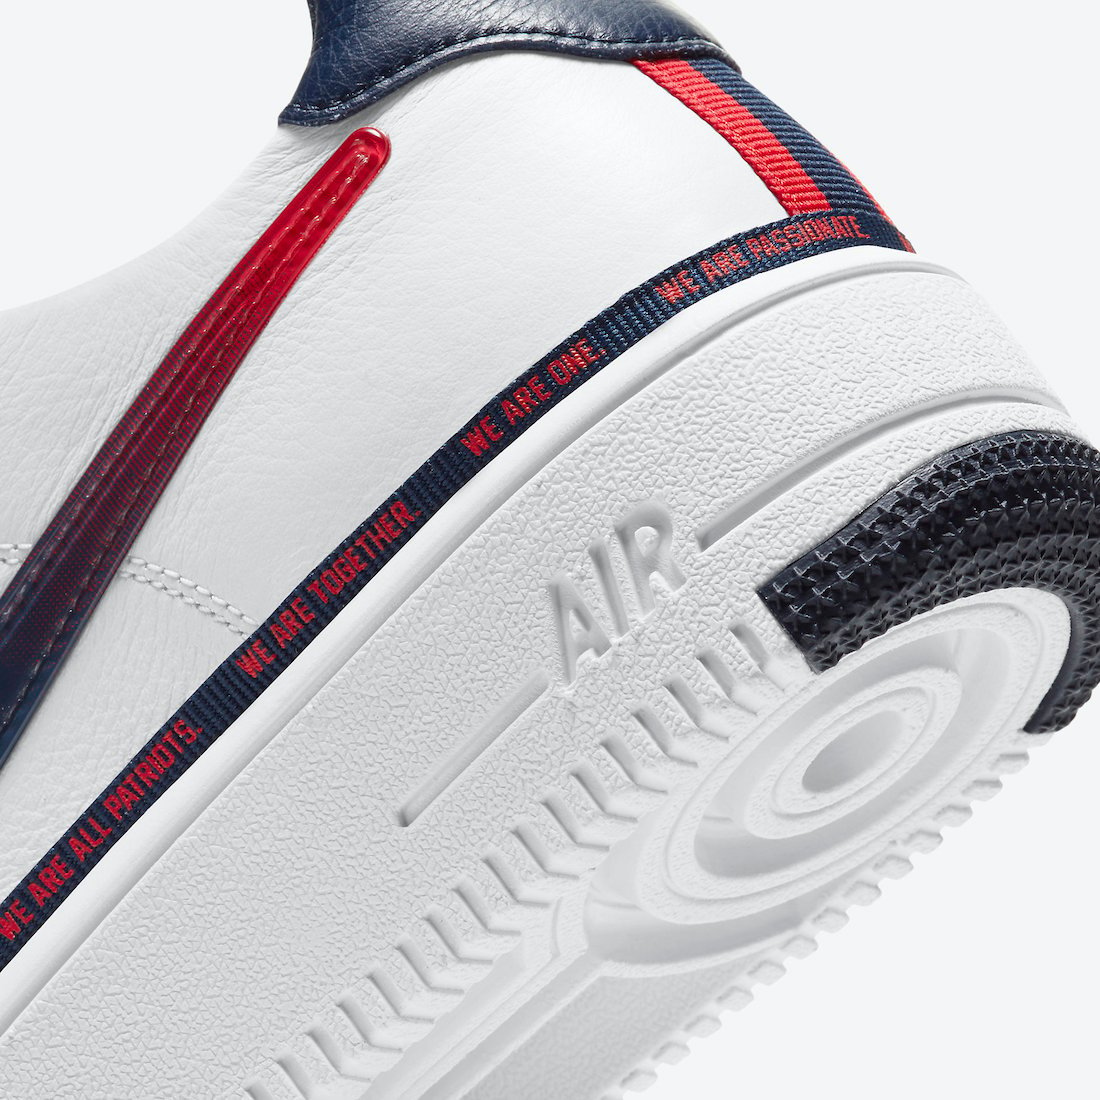 Nike Air Force 1 Ultraforce New England Patriots DB6316-100 Release Date Info